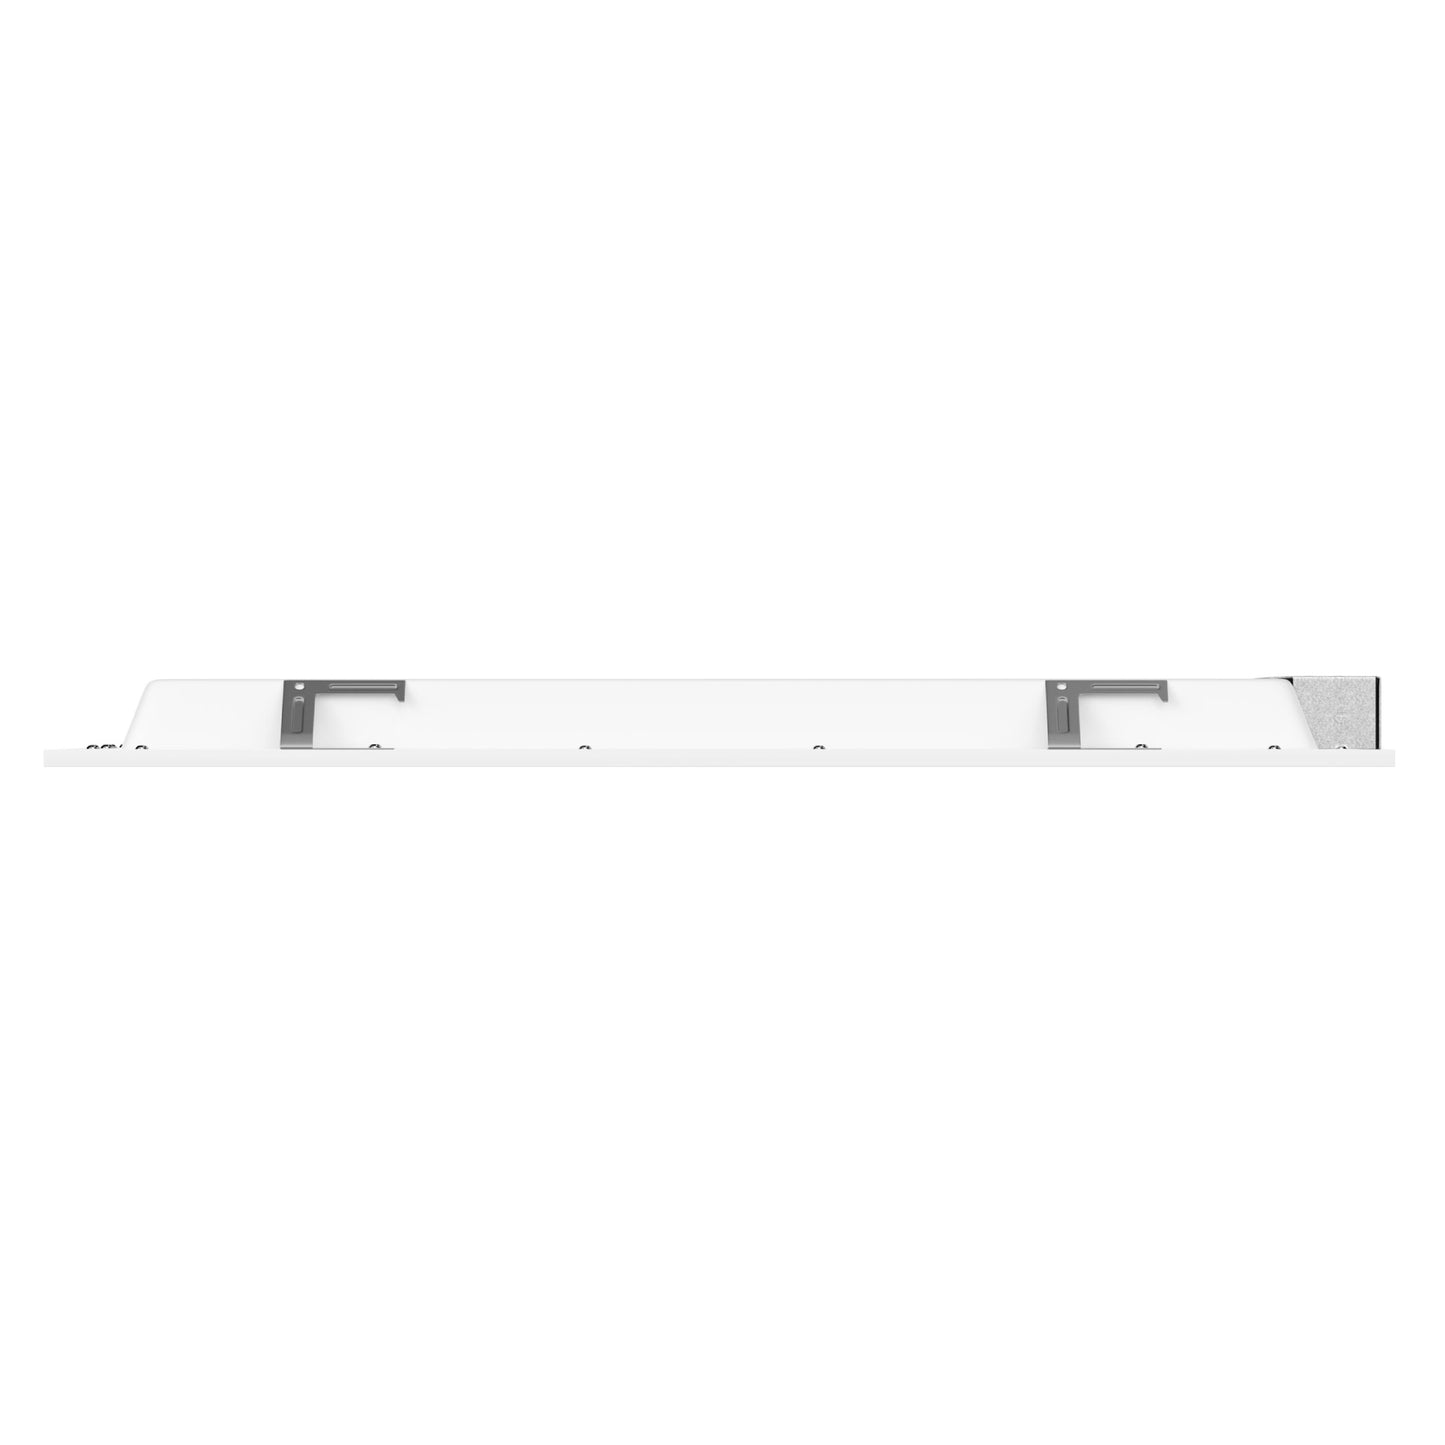 2 ft. X 2 ft. LED Flat Panel Light 6500K 40Watt AC100-277V UL Listed Dimmable, 5000 Lumens, Drop Ceiling LED Lights, For Offices Schools  Health Care Facilities